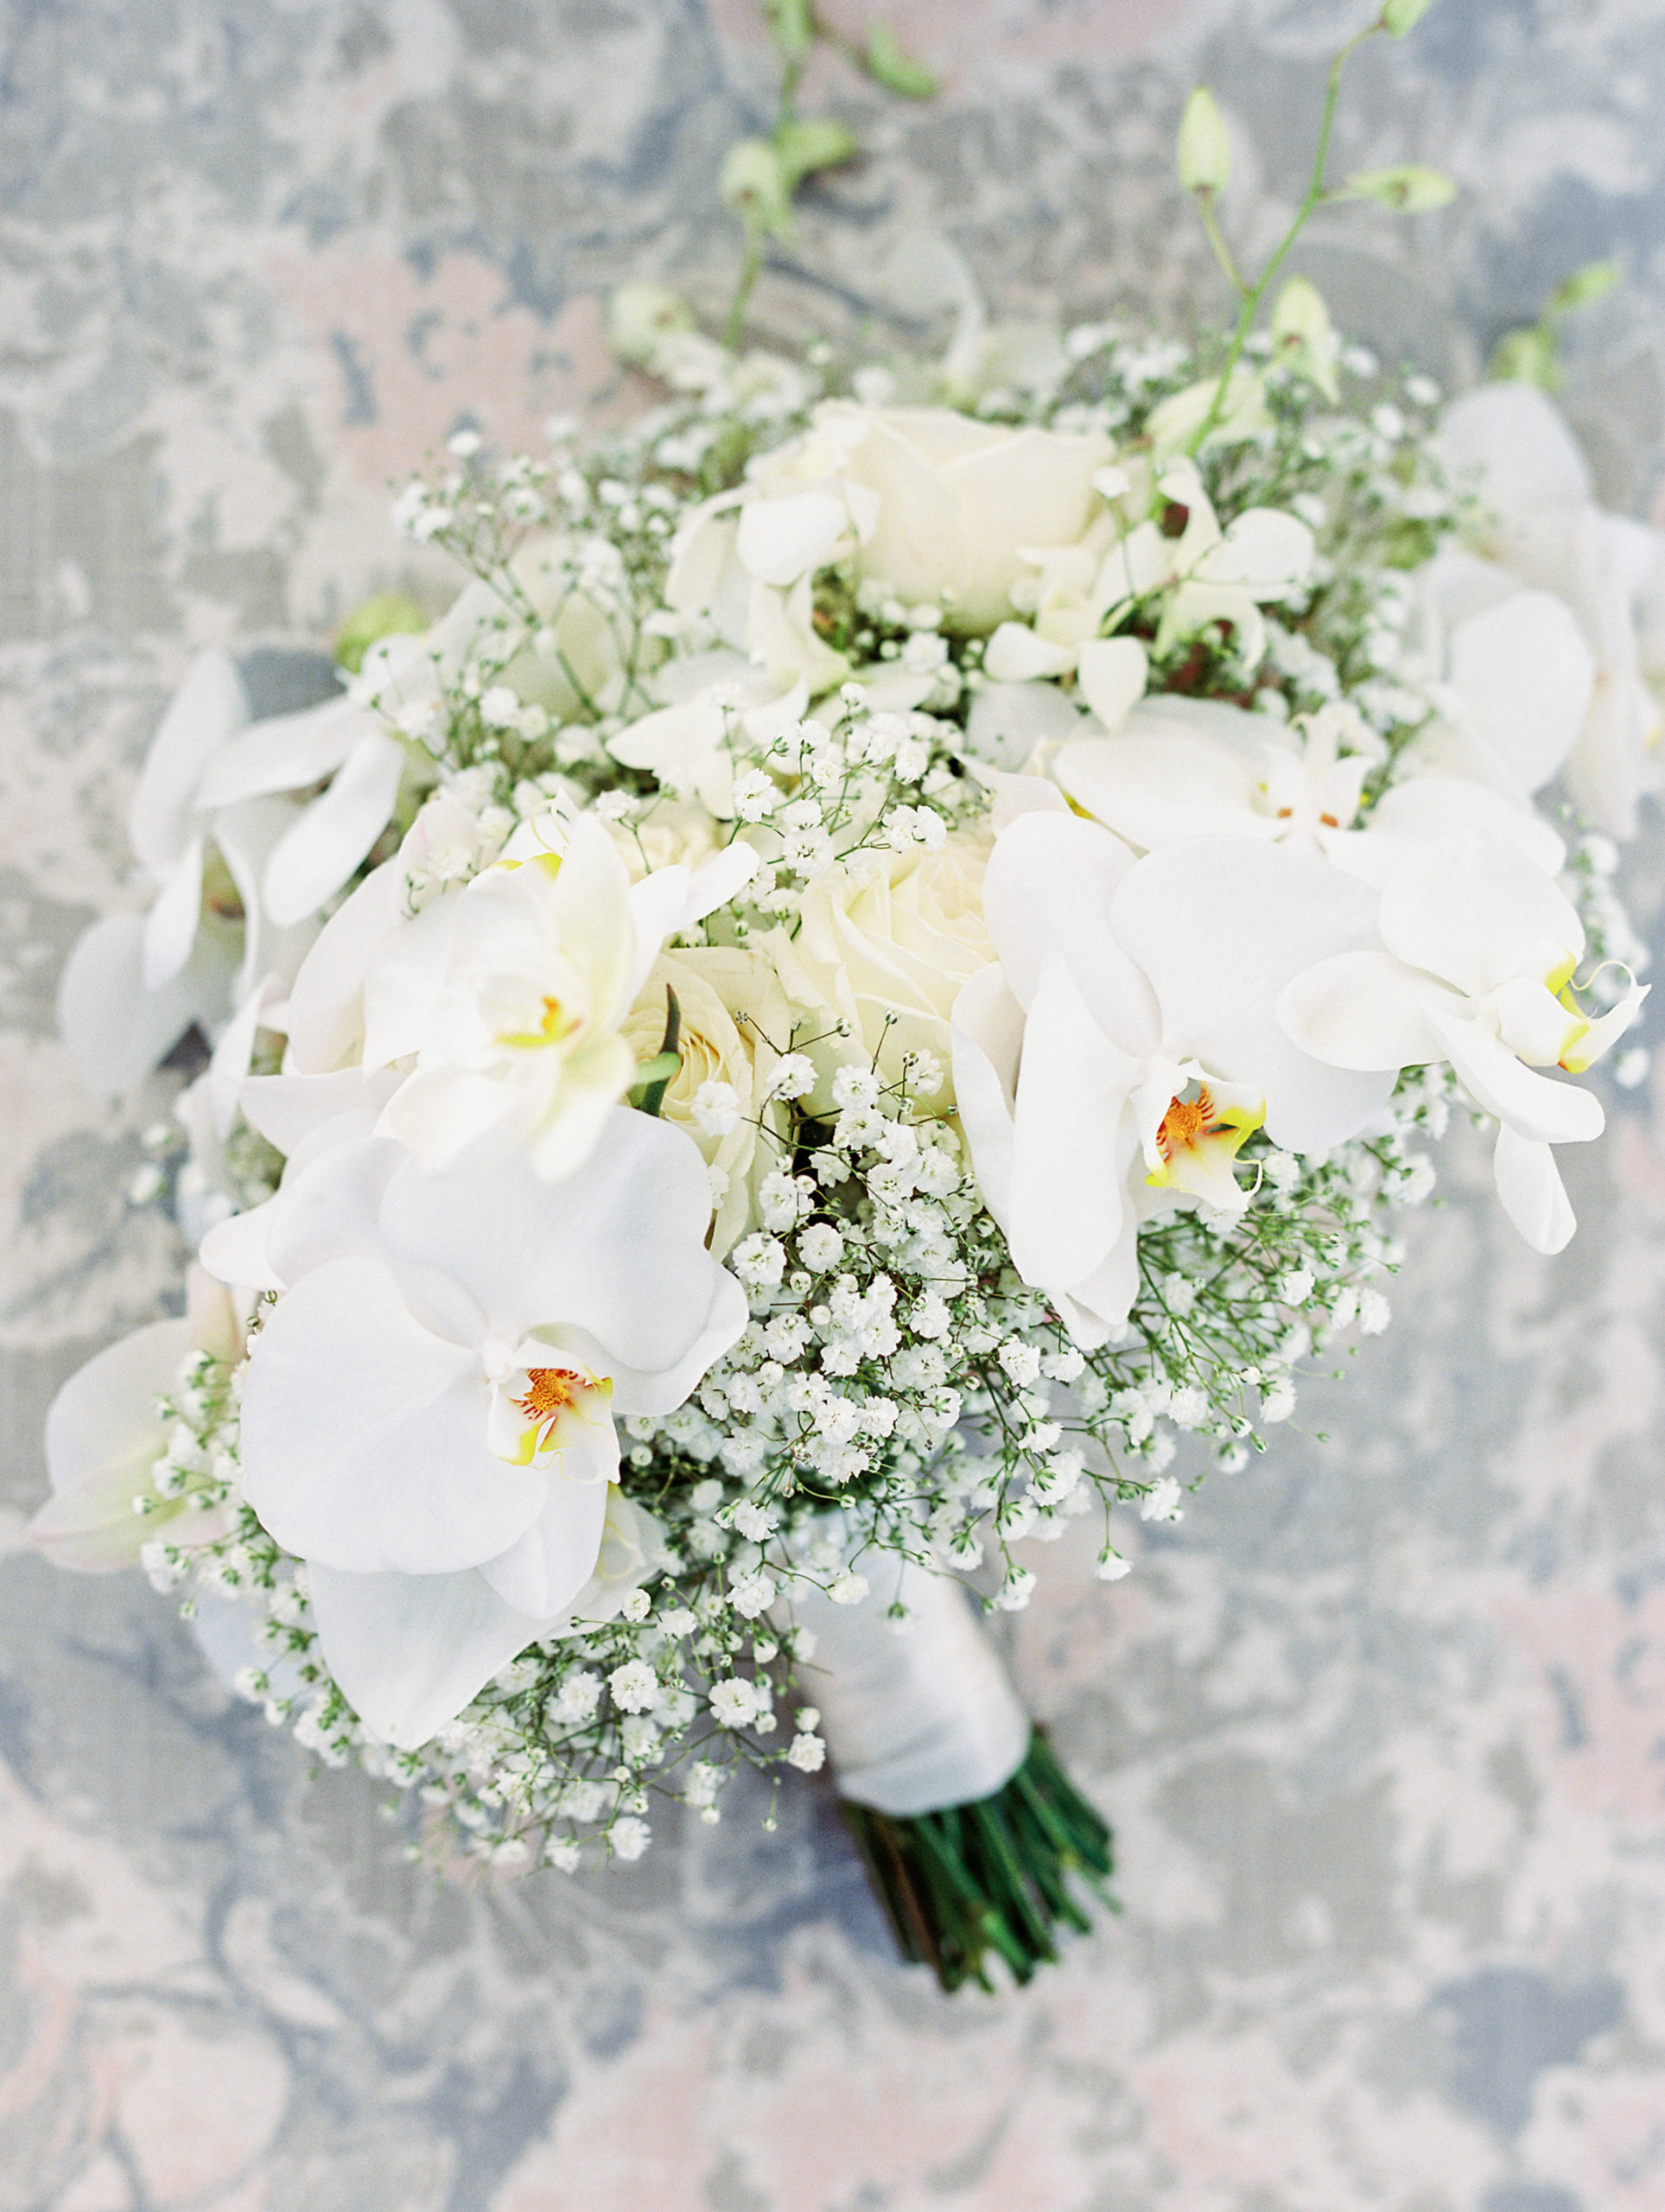 Up close view of bride's bouquet with ivory roses, baby's breath, and various white flowers Luxmore Grande Wedding